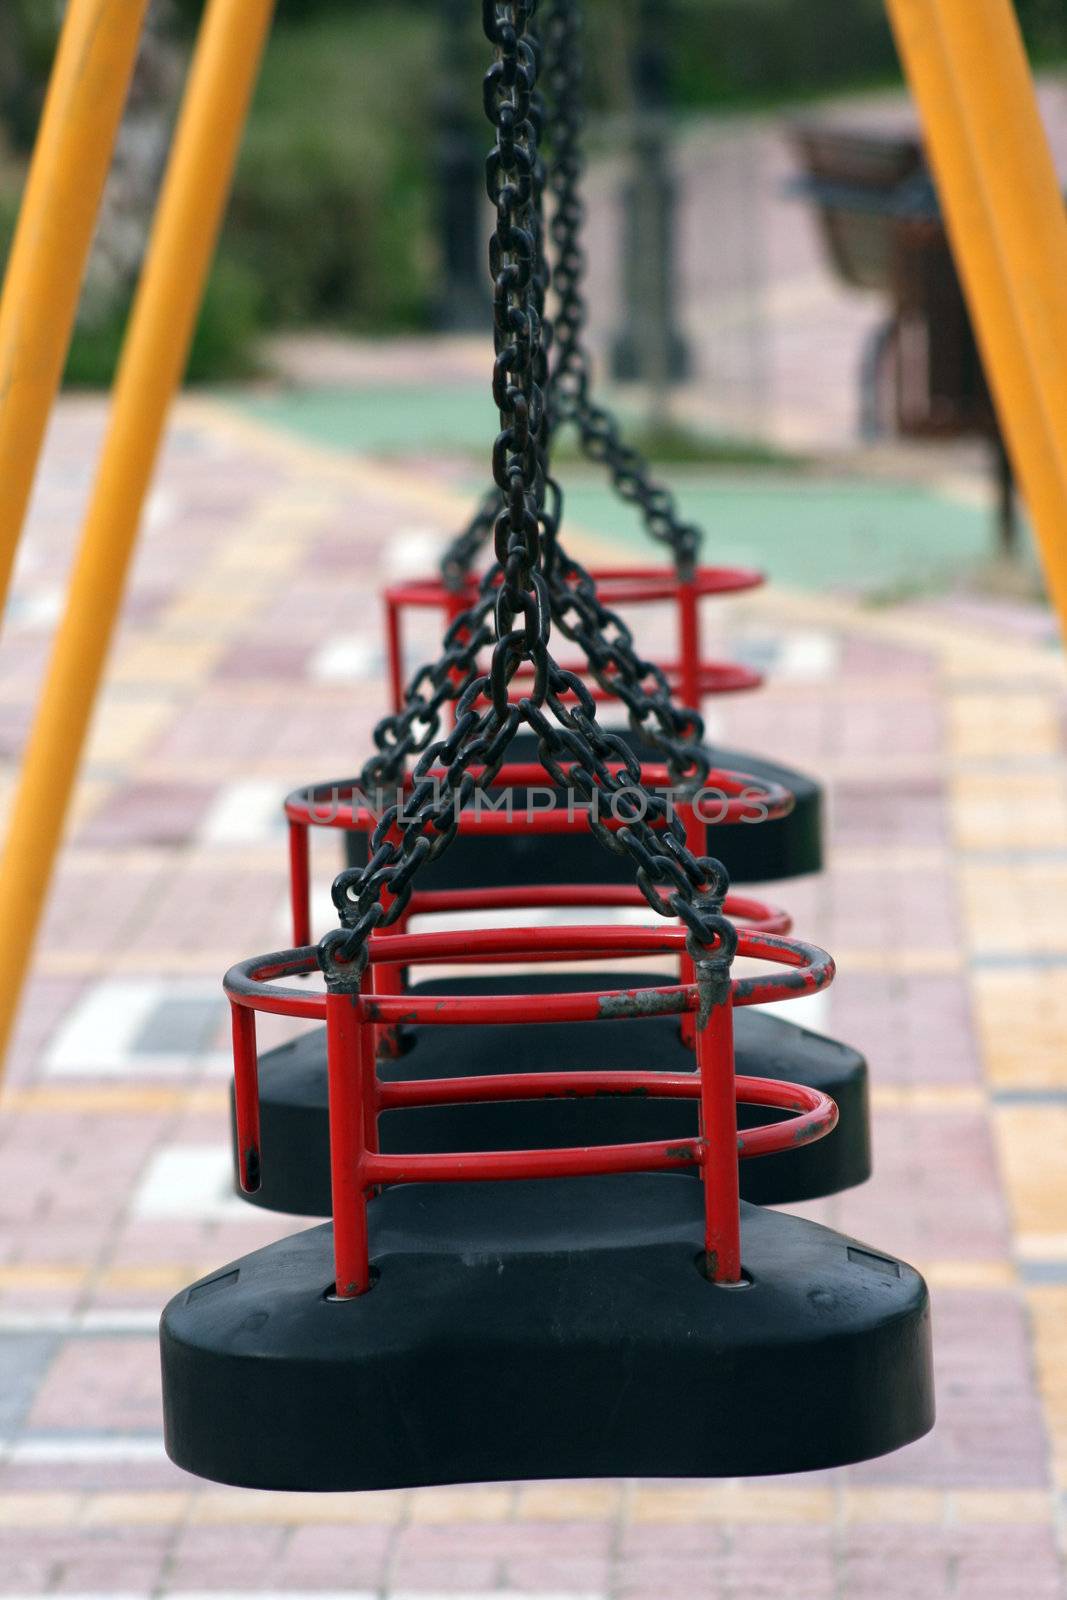 Empty Swings on a playground